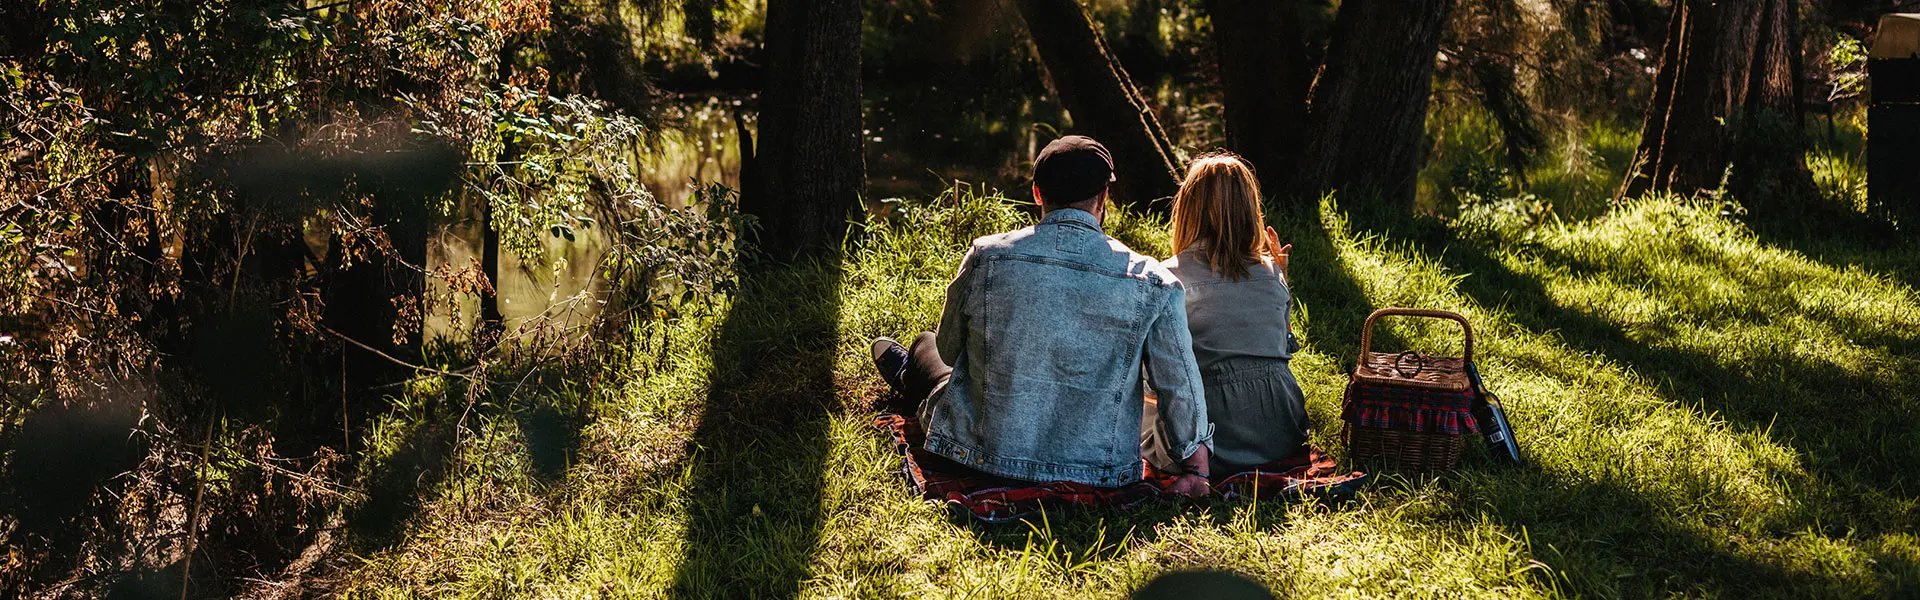 Couple having a picnic in the forest